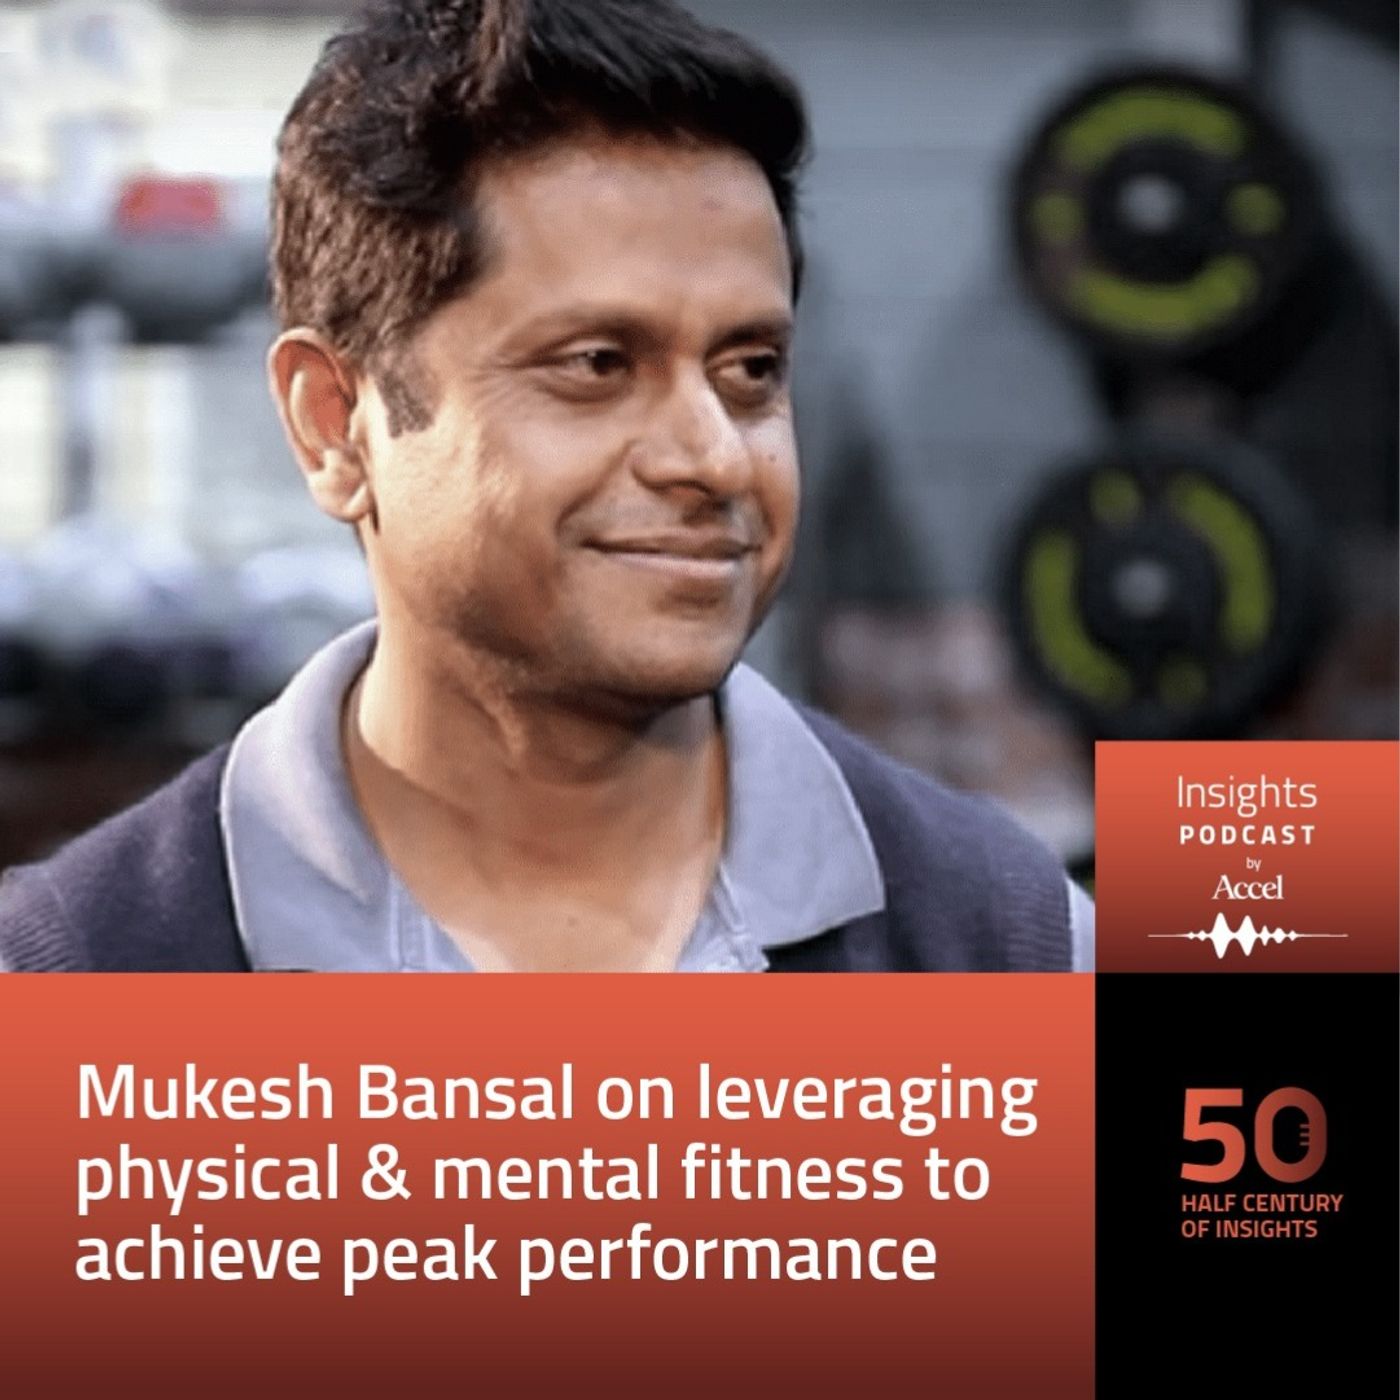 INSIGHTS #50 – Mukesh Bansal on leveraging physical & mental fitness to achieve peak performance